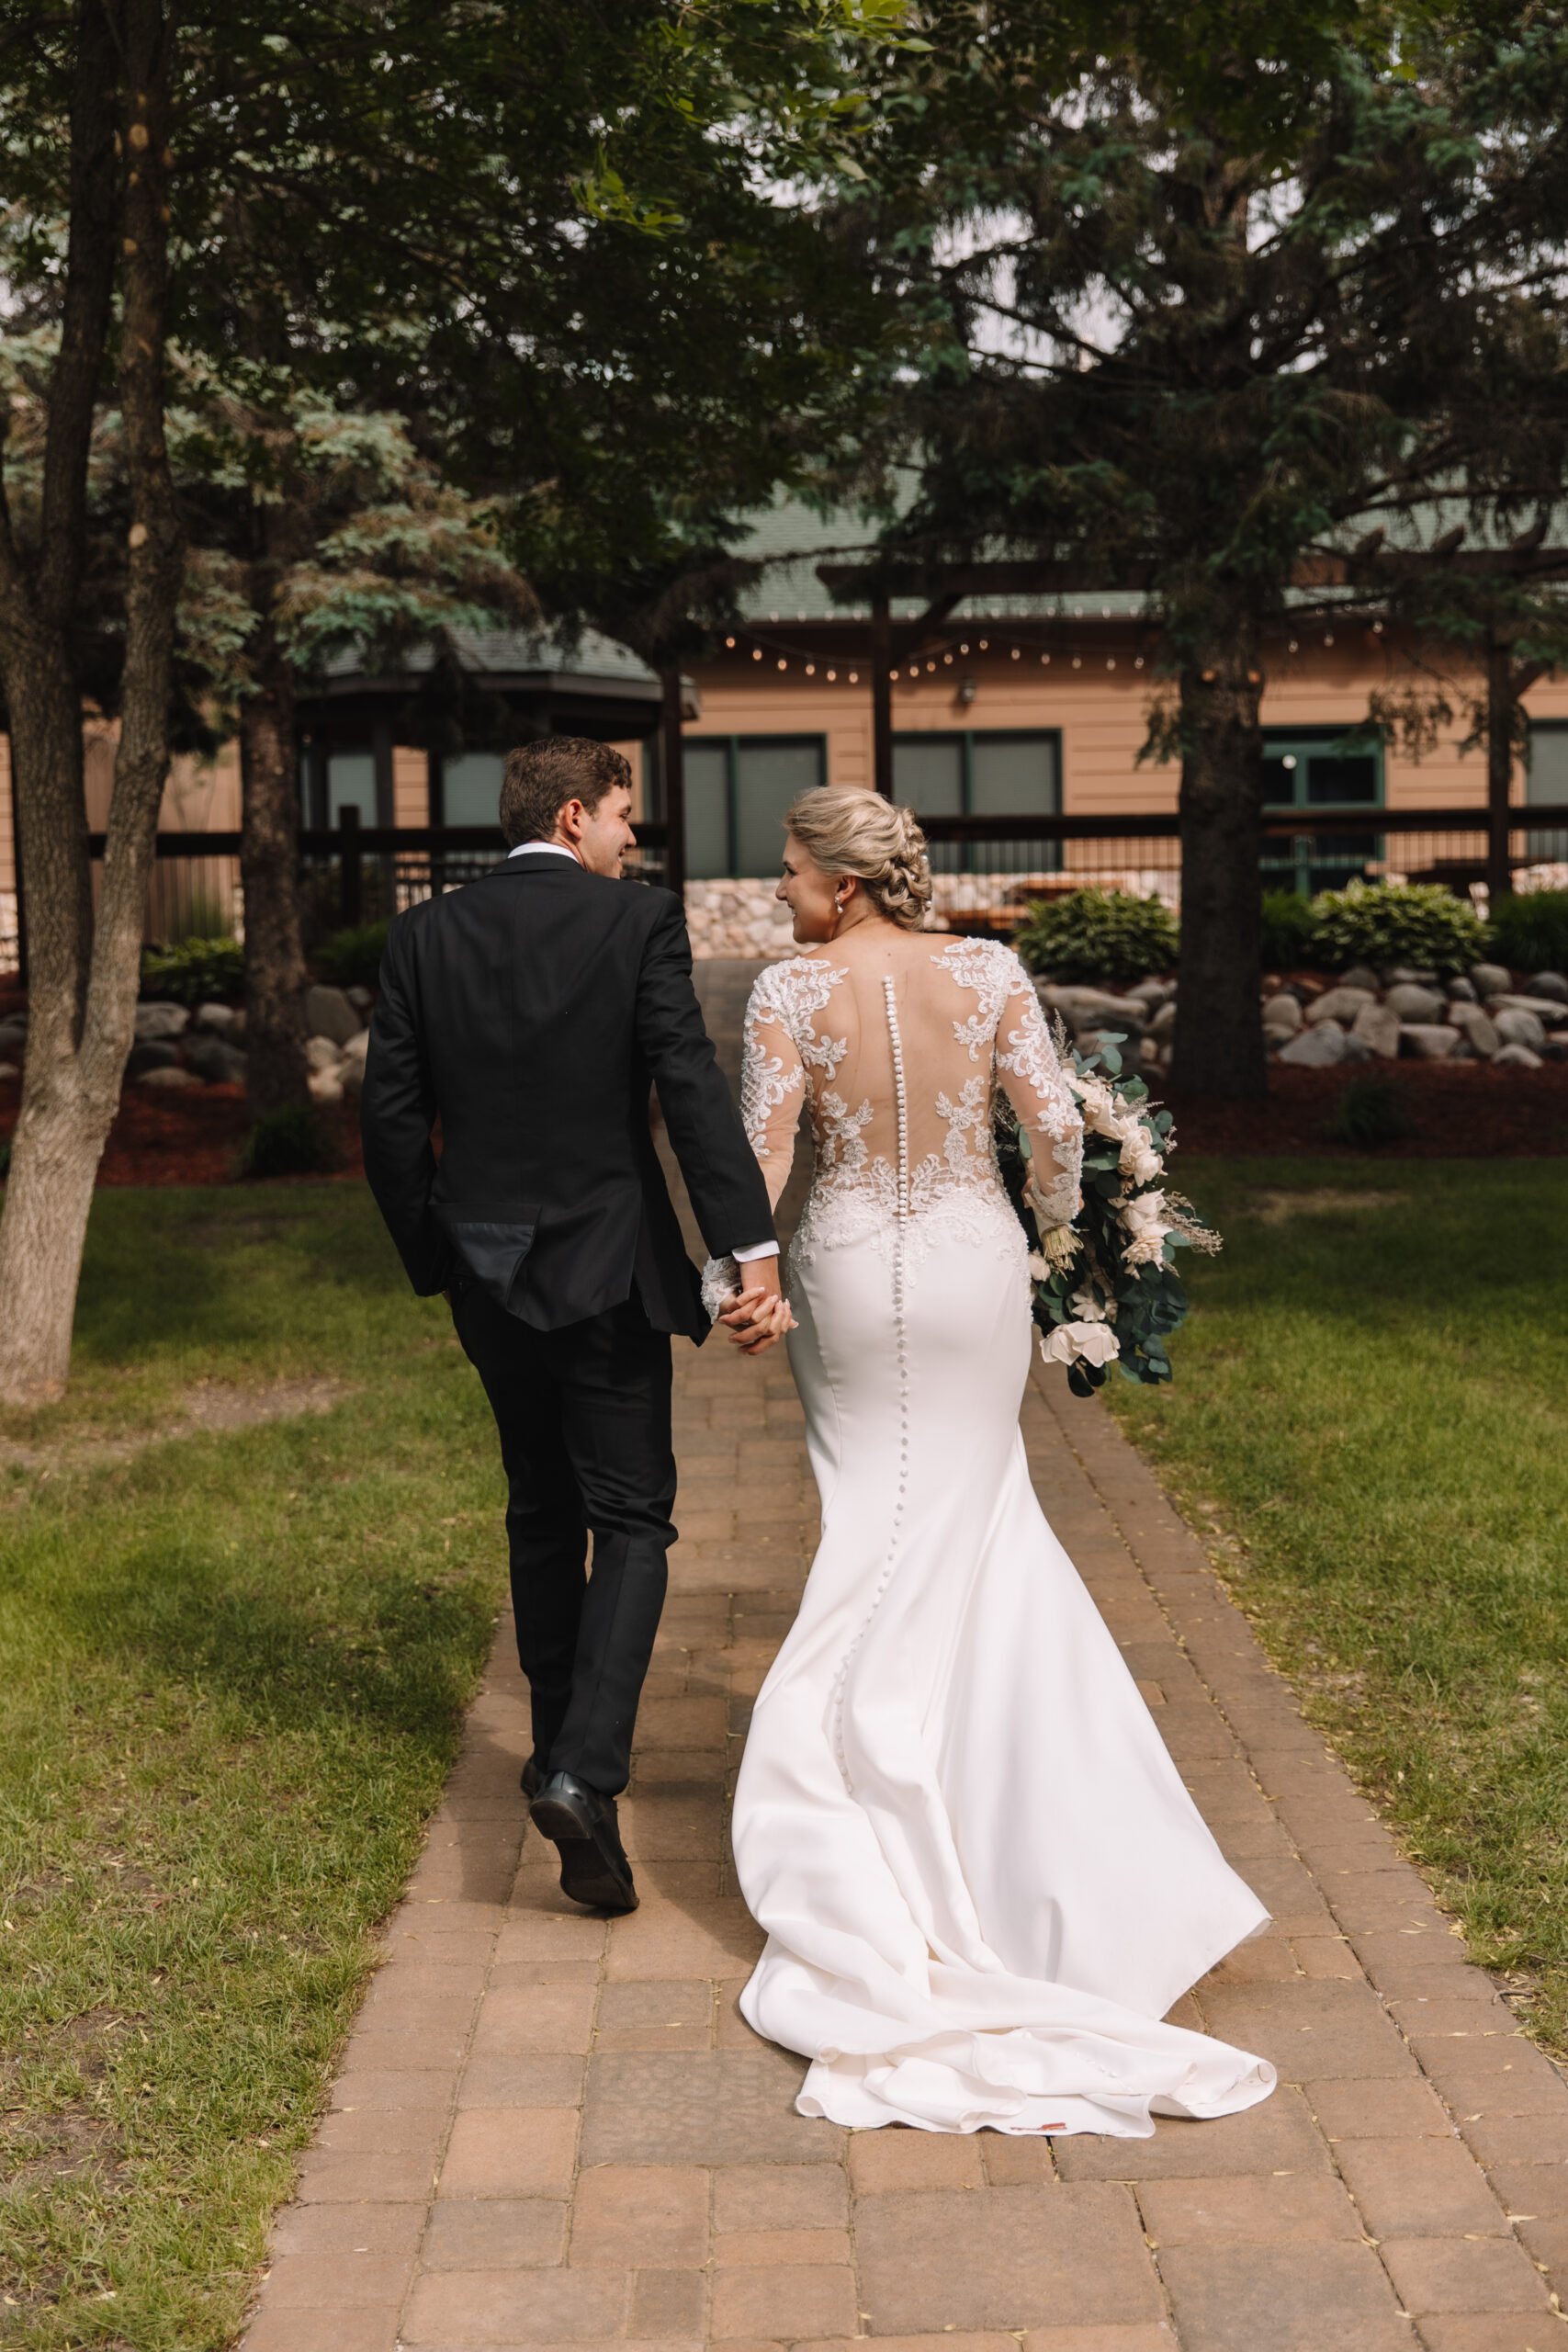 Bride and groom walking away together happily after first look with bride's beautiful open back, lace dress 